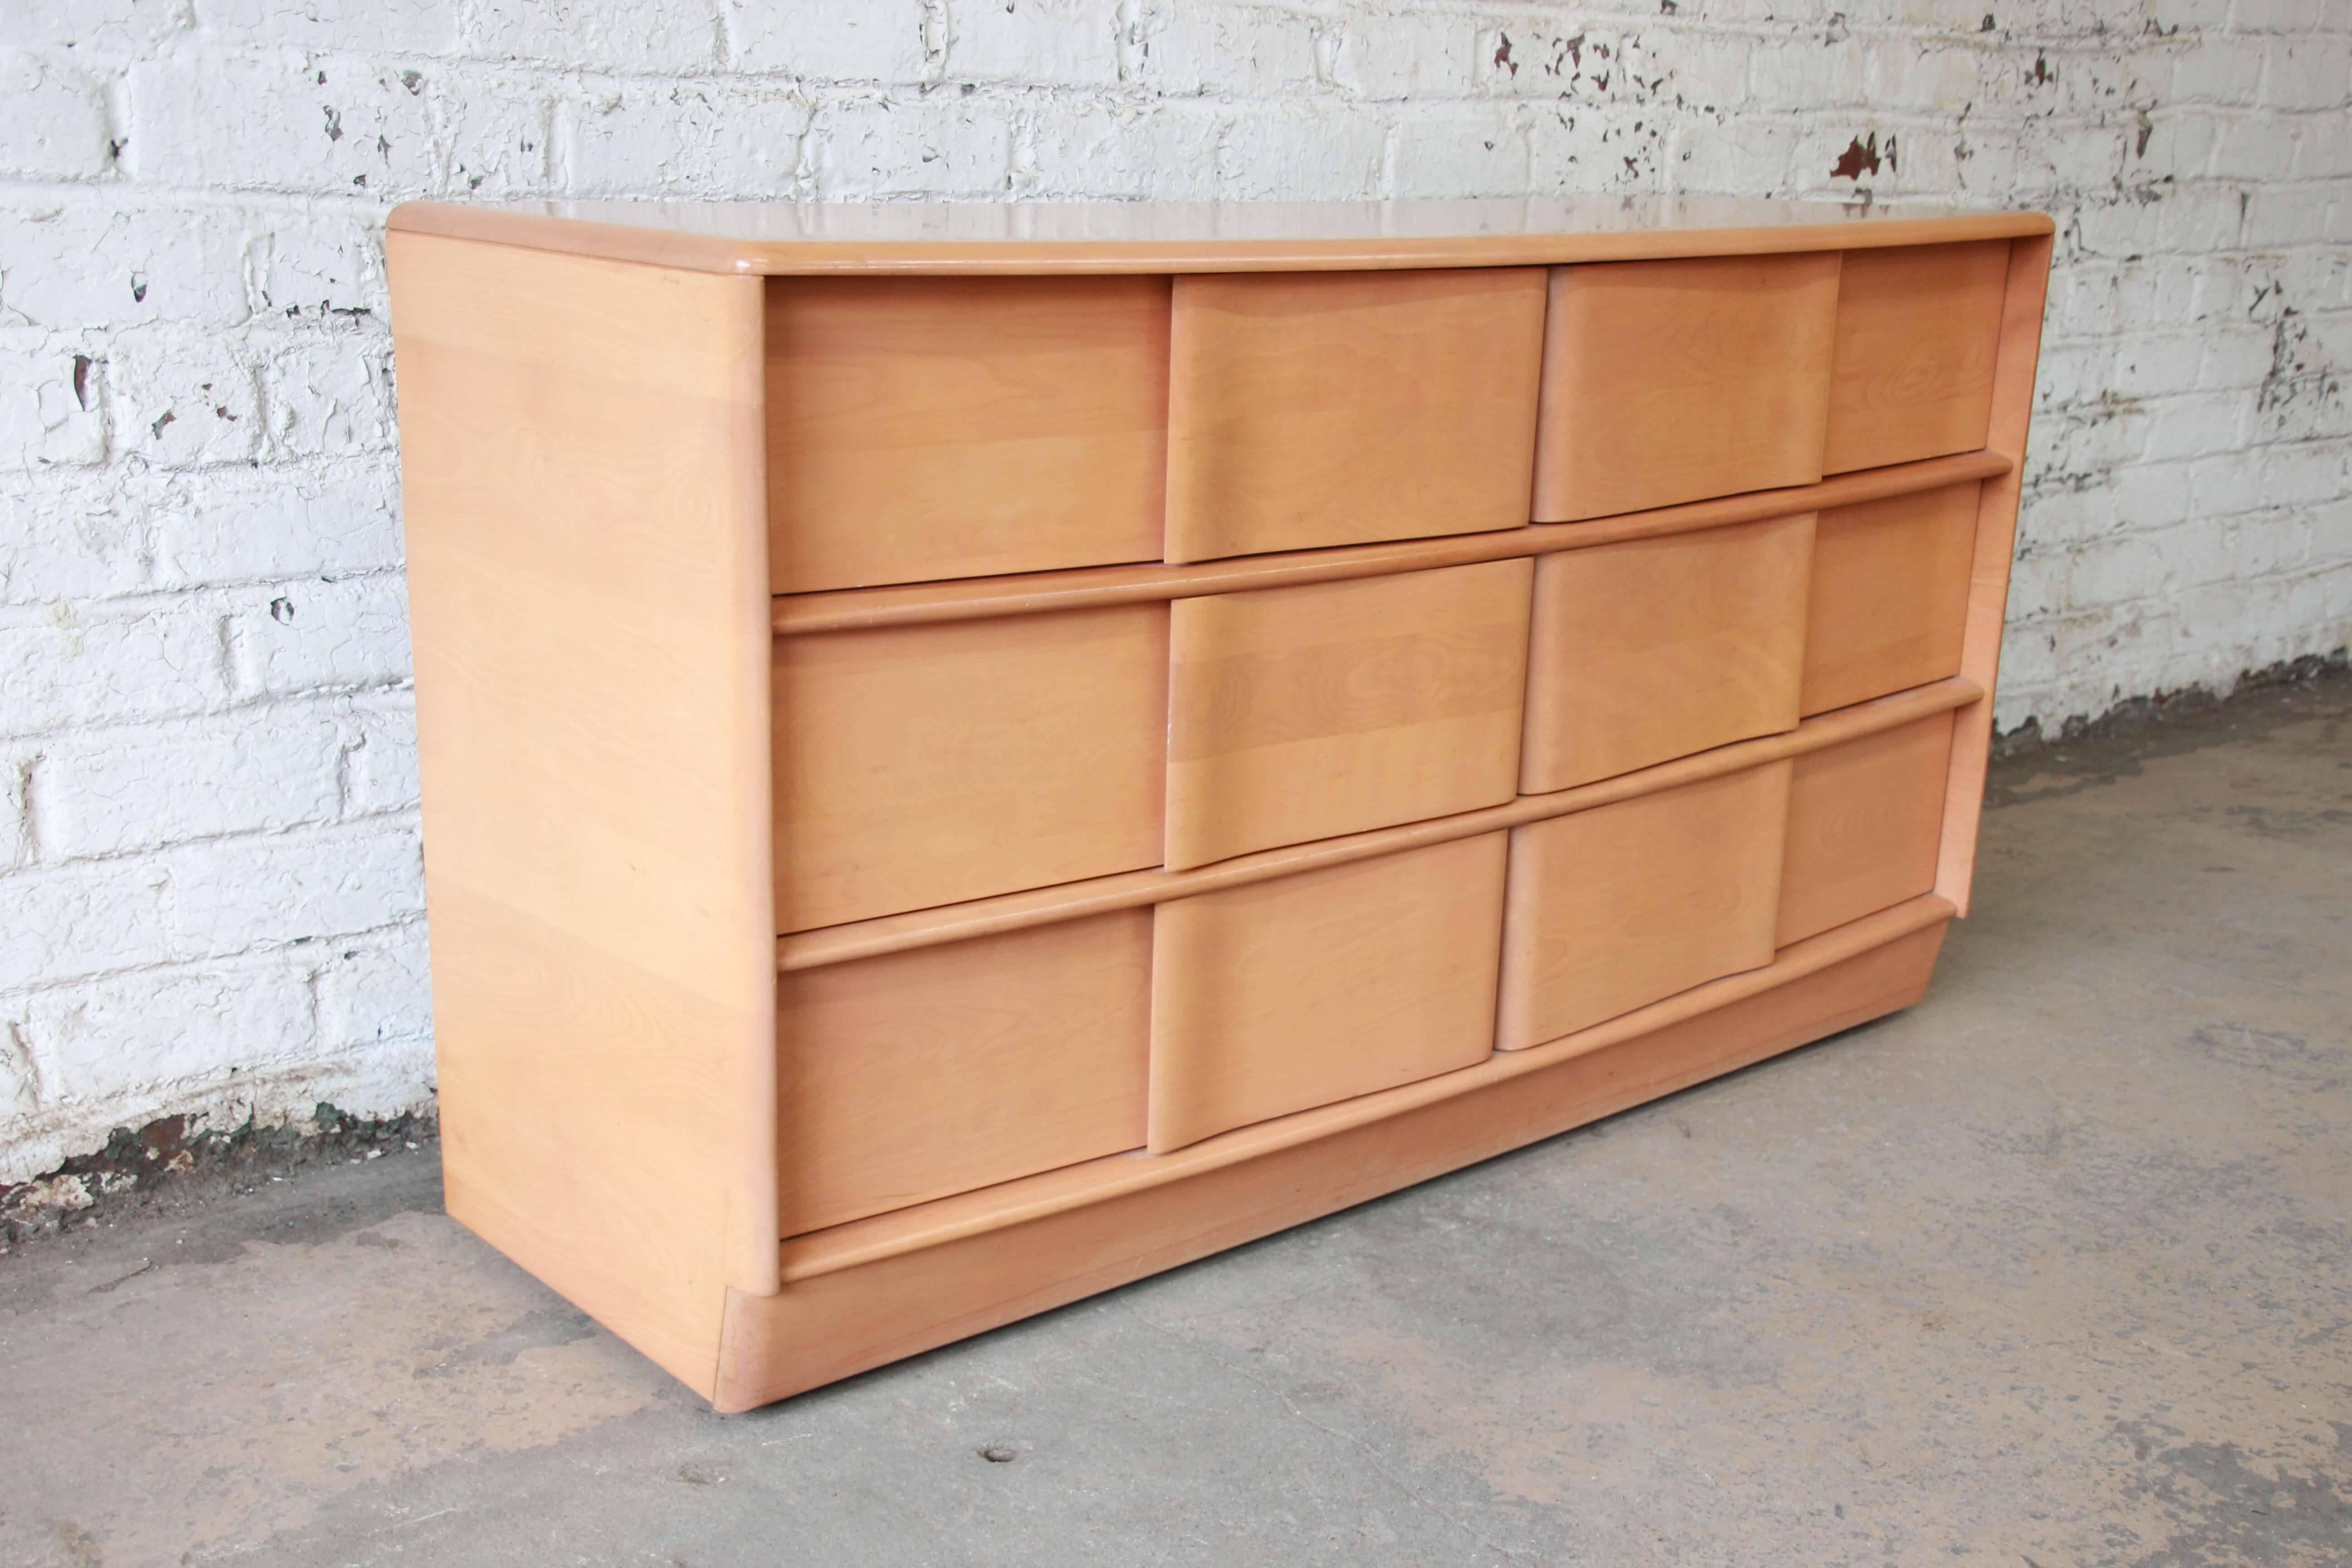 Offering a very nice original condition Mid-Century Modern Heywood-Wakefield Sculpture six-drawer dresser. The dresser has sculpted pulls and the drawers open and close smoothly with lots of room for storage. The dresser is made from solid wood and